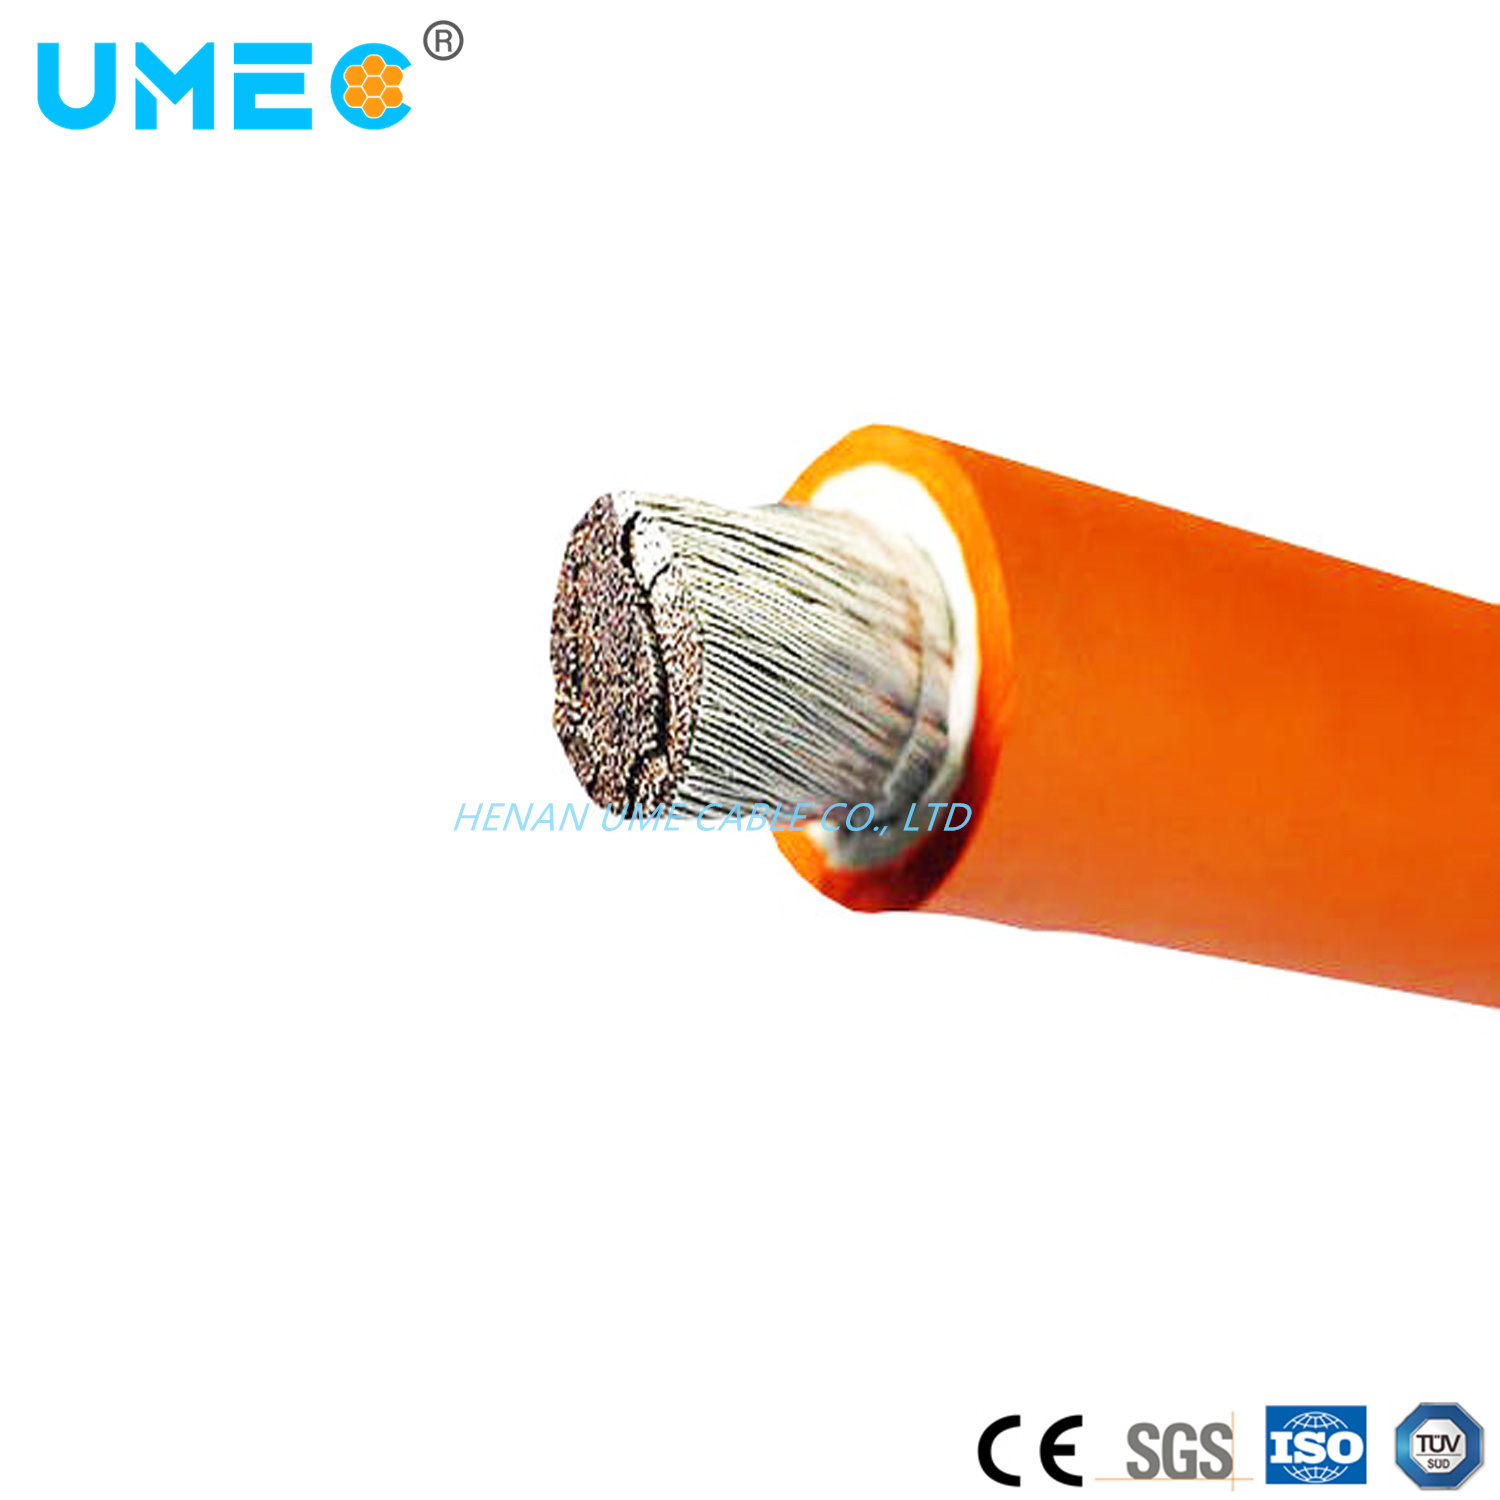 China Professional Flexible Jointer Aluminum Alloy or Copper Conductor Rubber Welding Cable